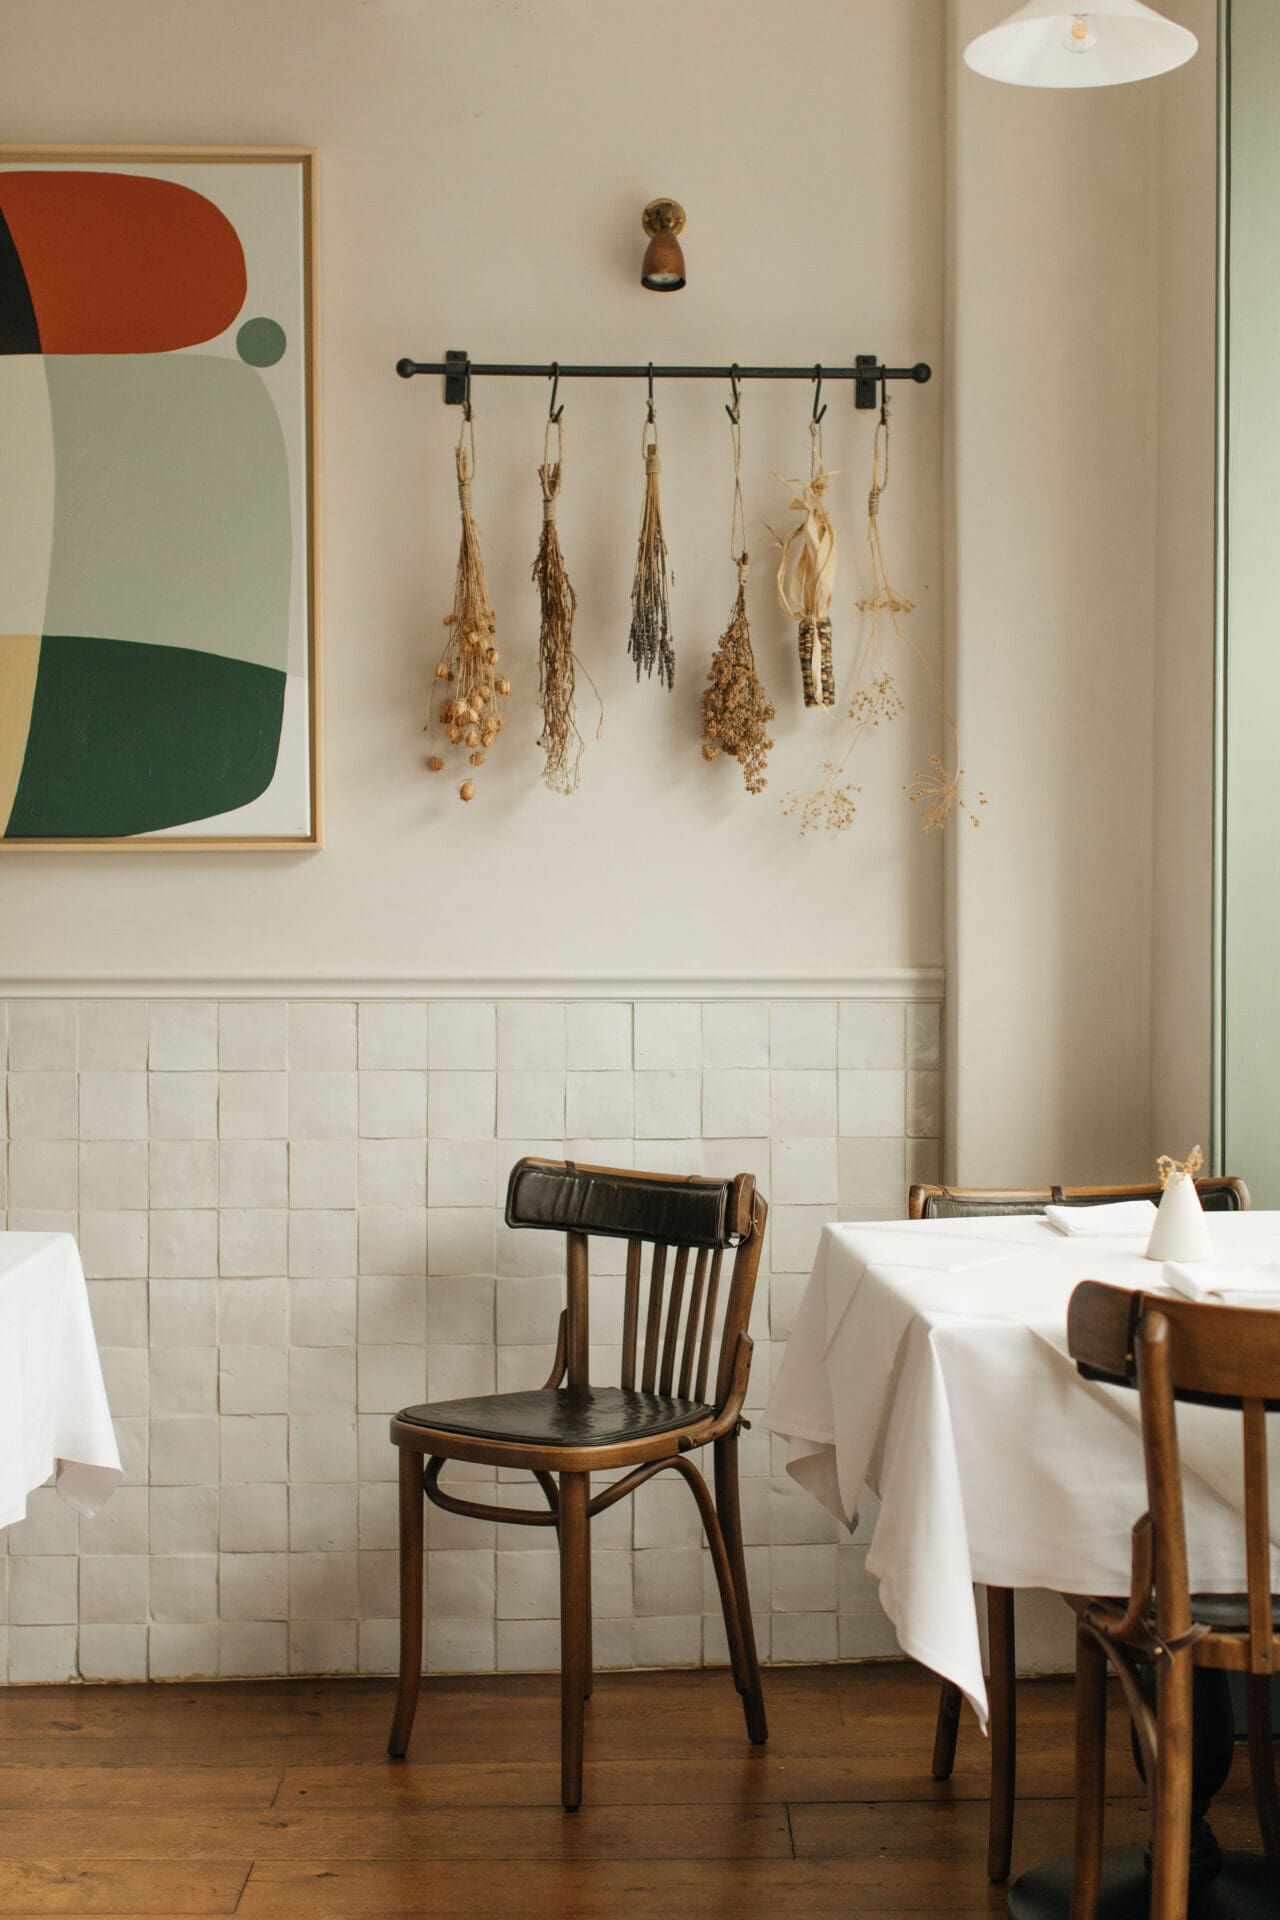 The best restaurants in Bruton | interiors as Osip, a wooden chair against a white tiled wall